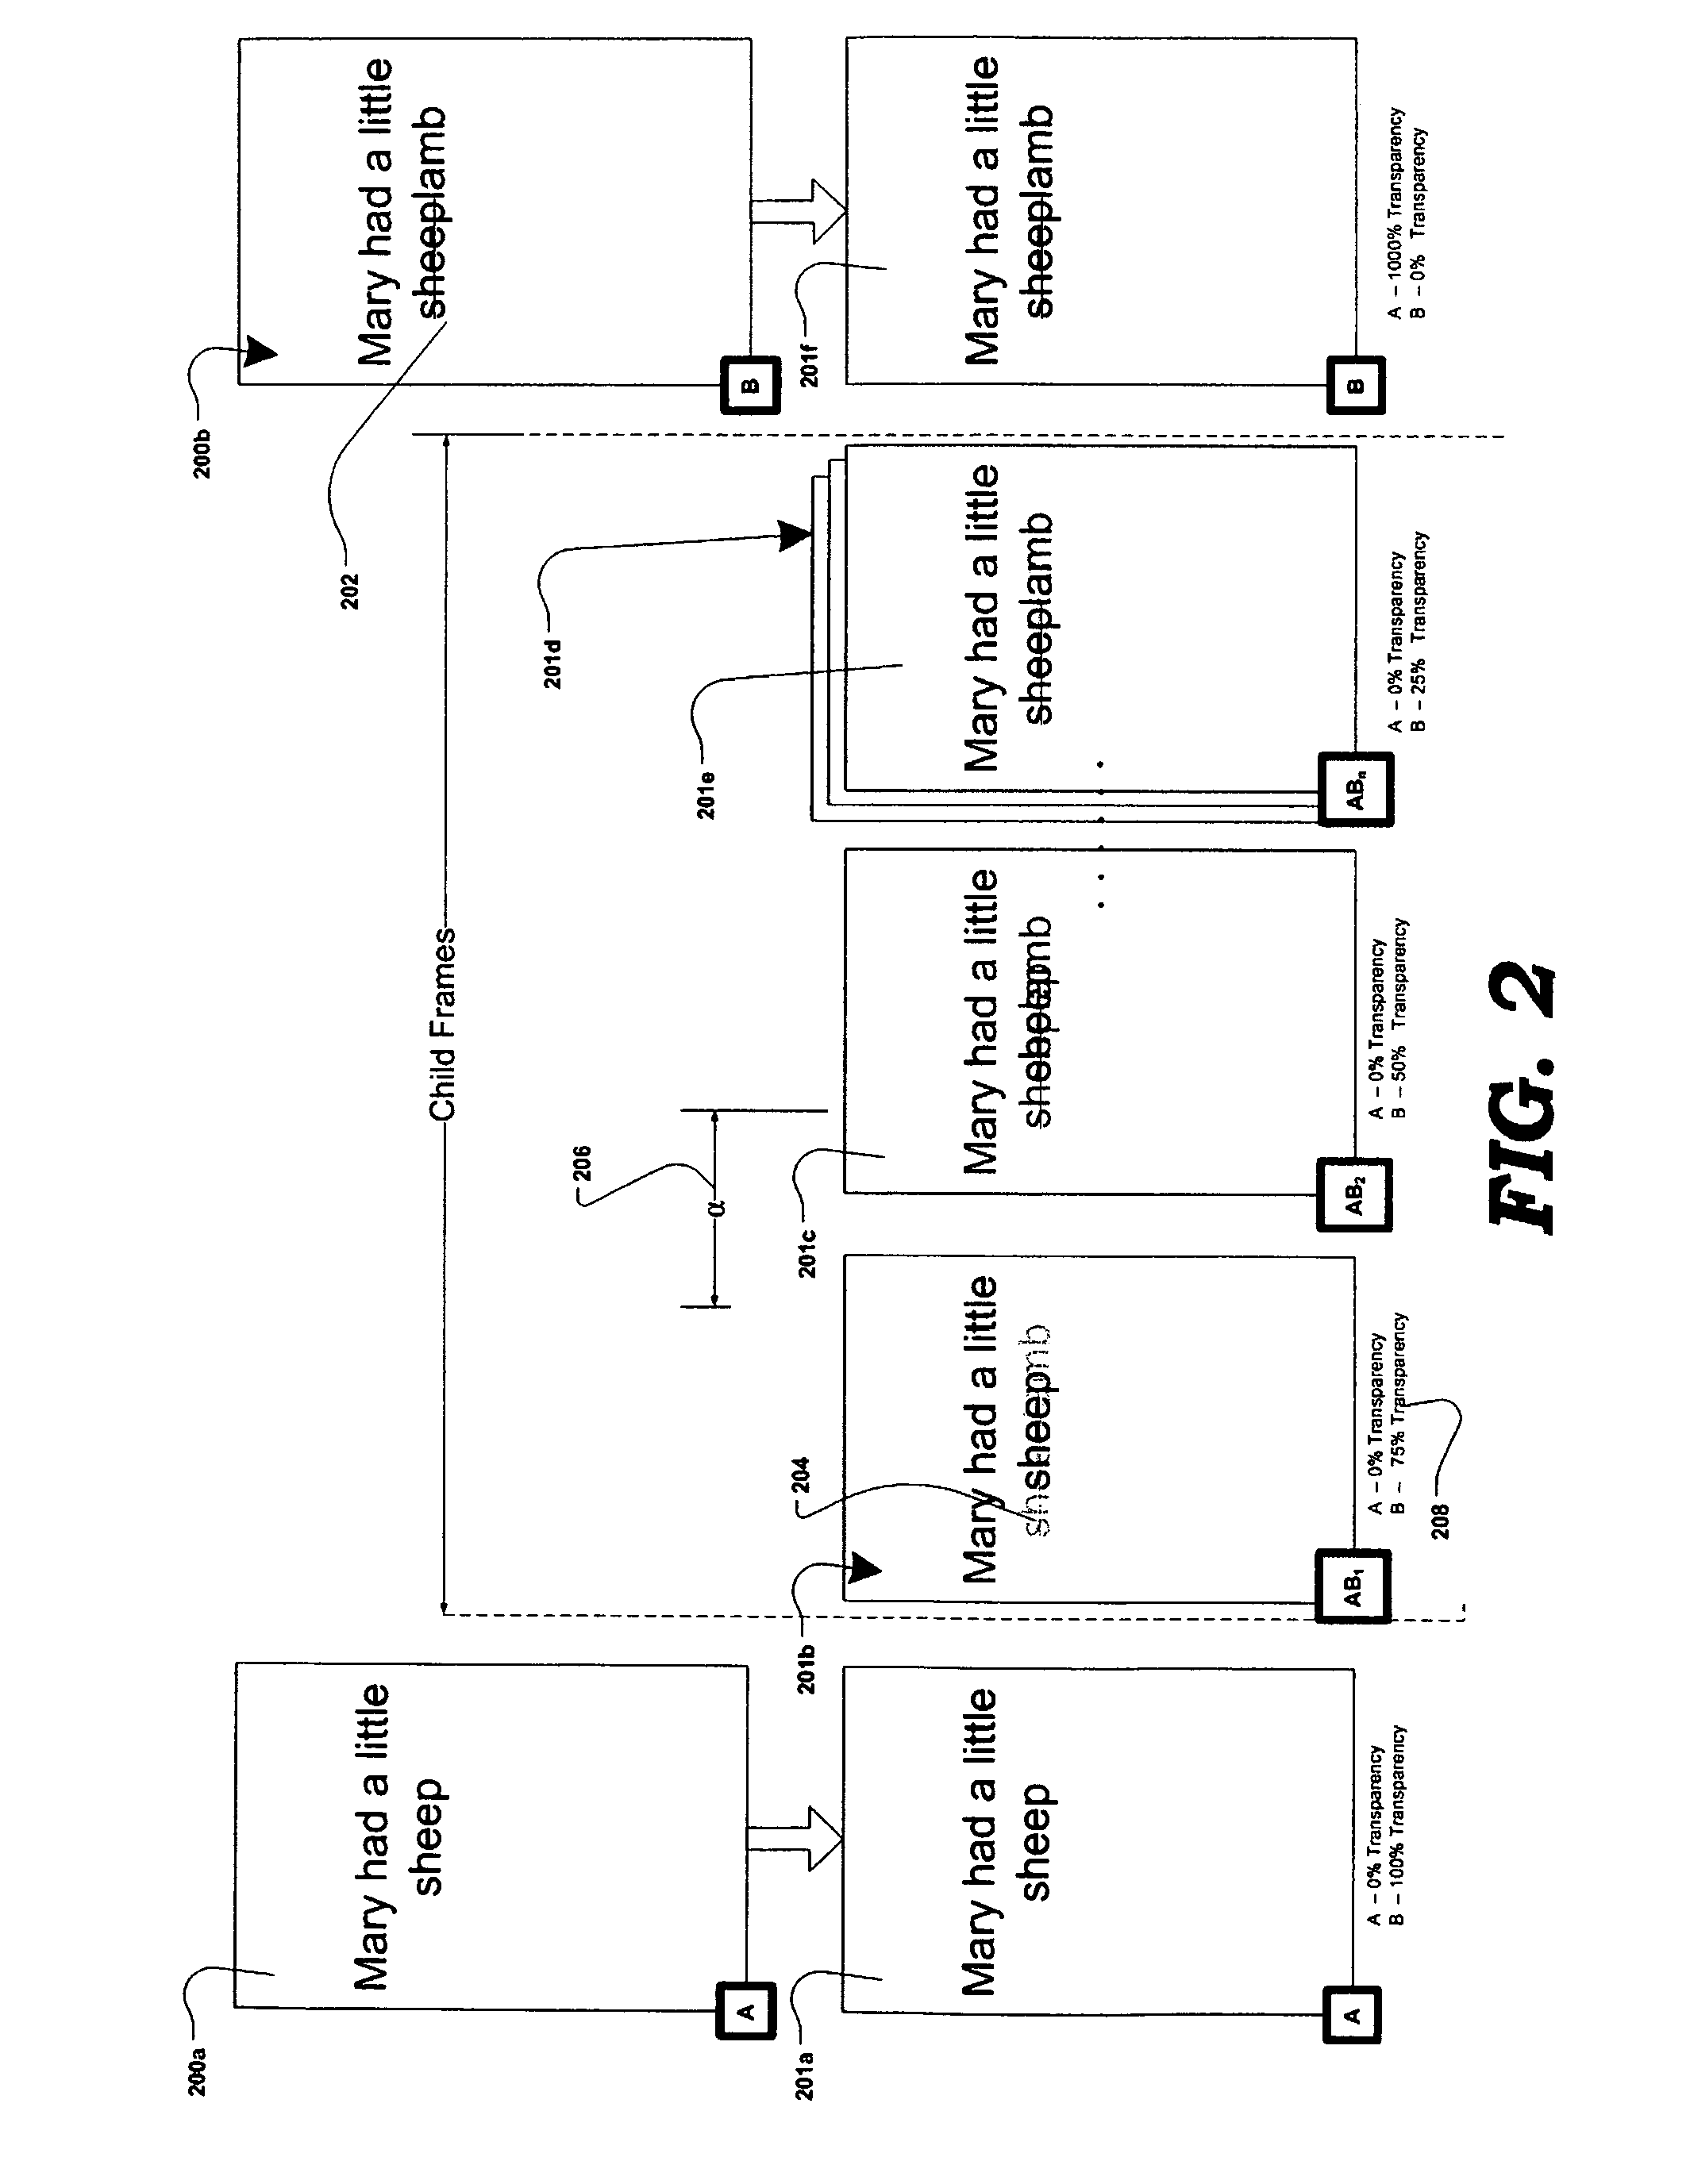 Method for presentation of revisions of an electronic document